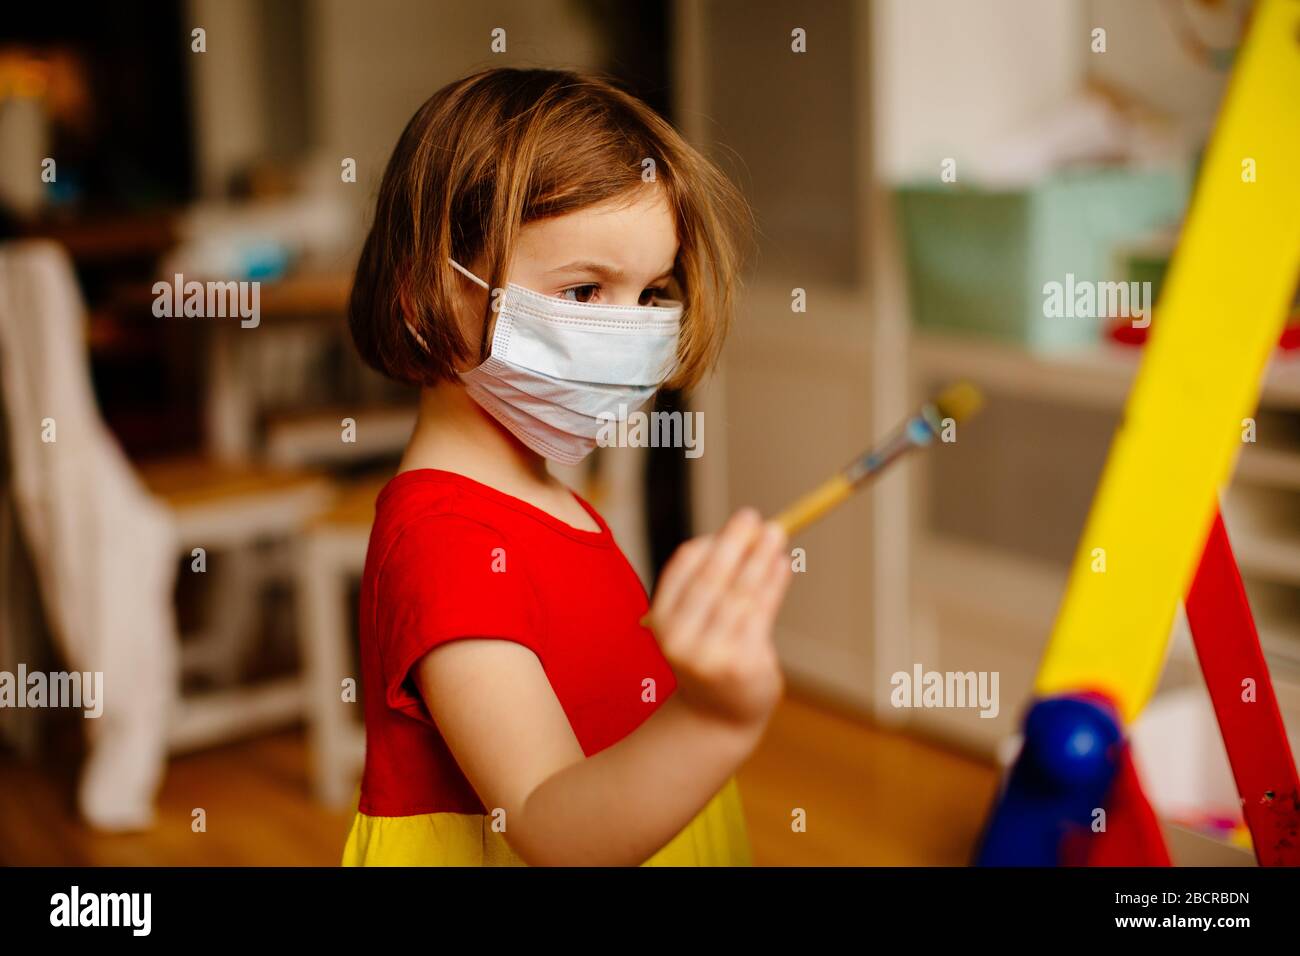 Portrait of a small preschool child with virus protection surgical face mask due to coronavirus, painting at an art easel at home Stock Photo